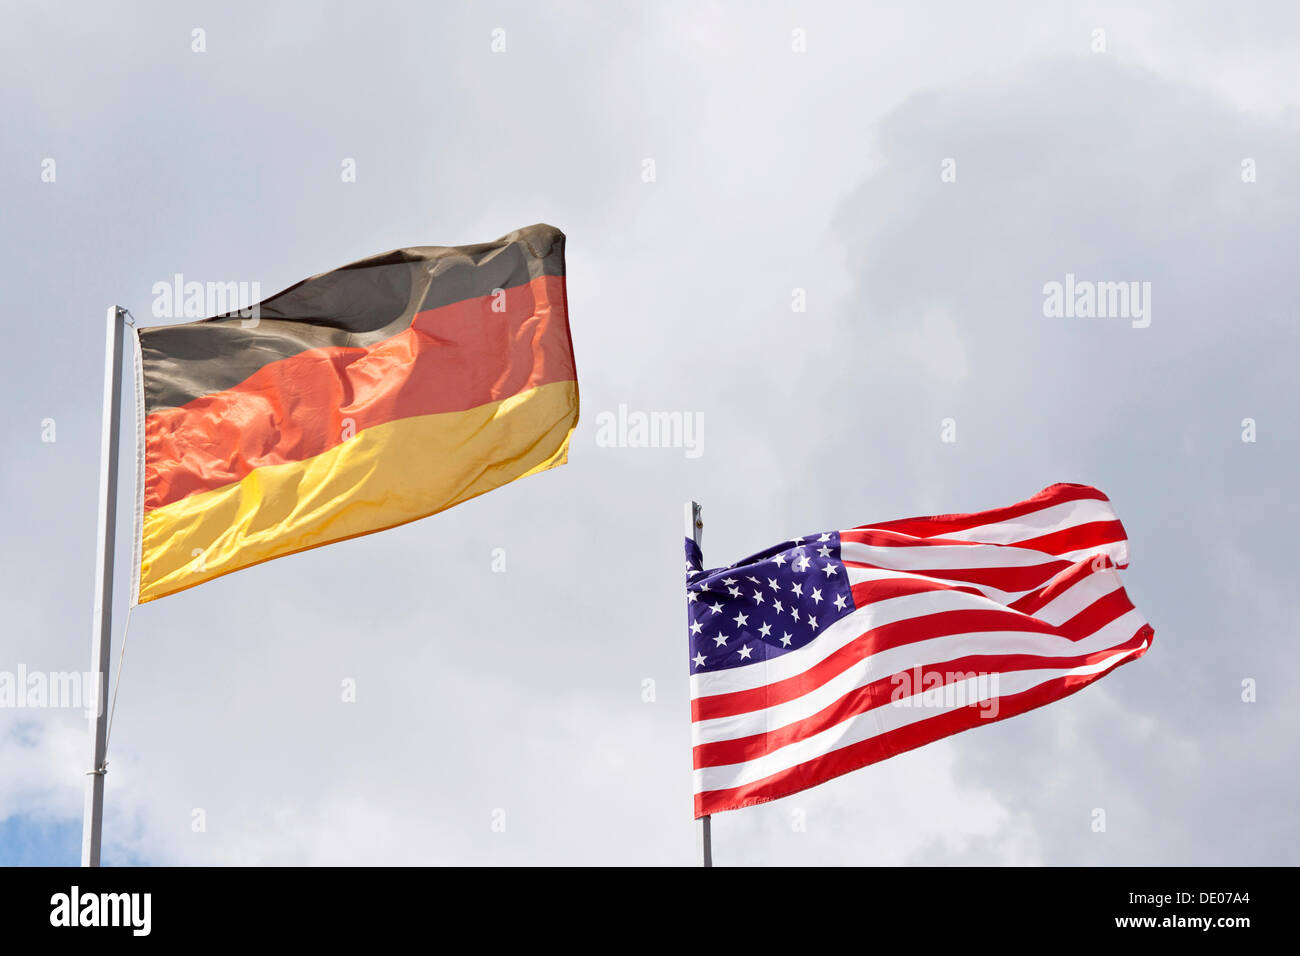 The national flags of Germany and the USA blowing in the wind, stormy, symbolic image Stock Photo